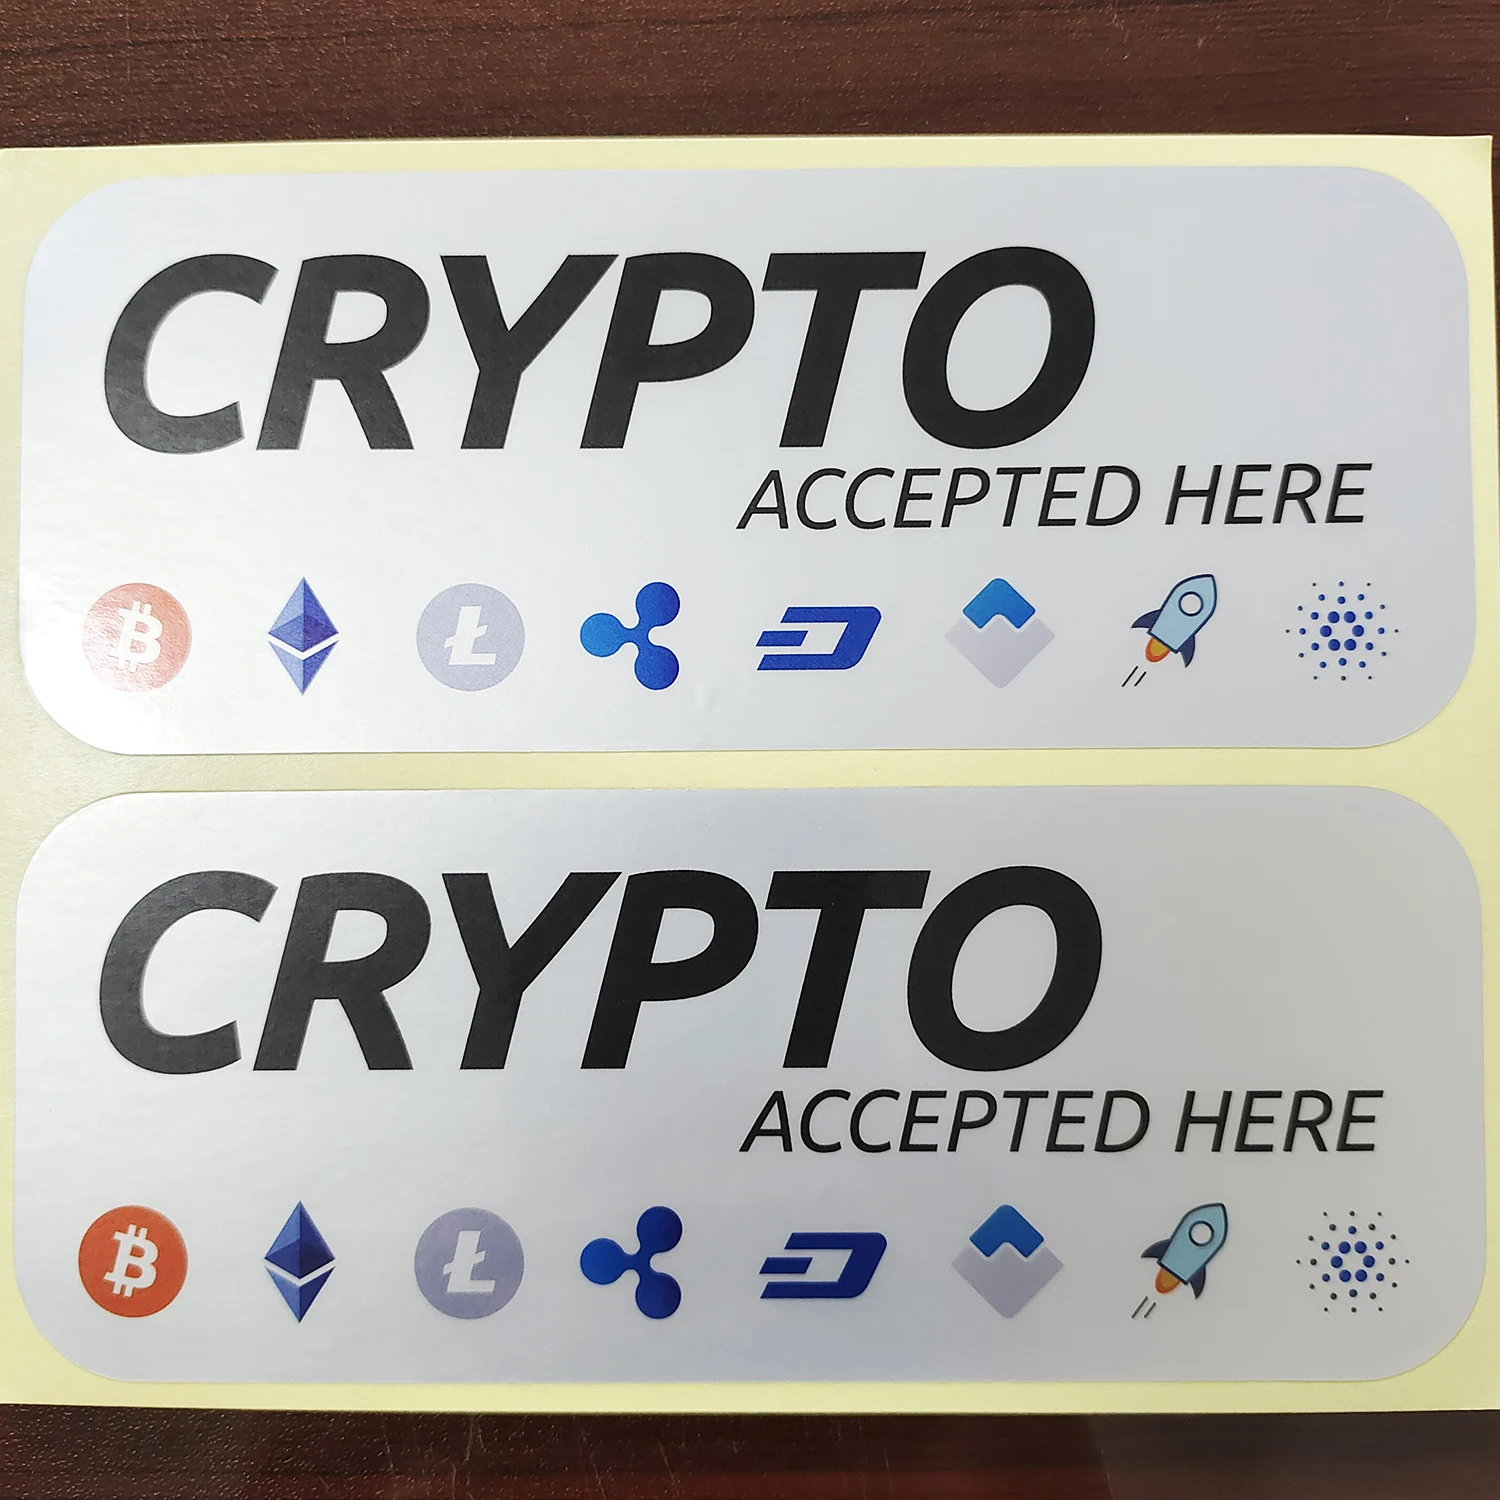 60 pcs 15x6cm CRYPTO accepted here Self-adhesive durable silver PET label sticker,Item No. FS27